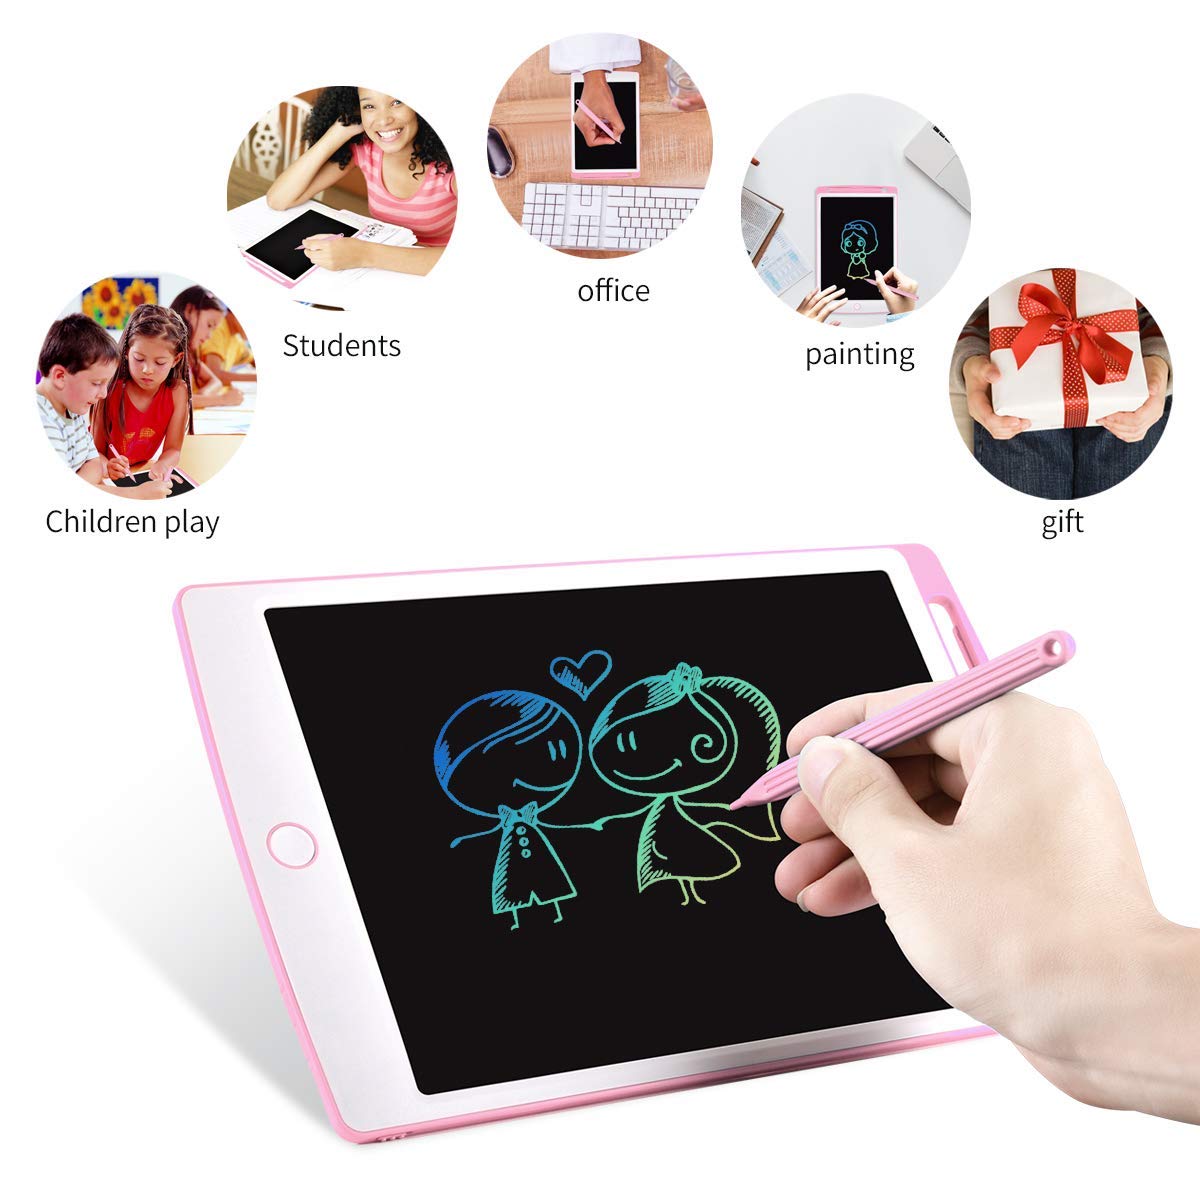 LCD Writing Tablet 10 Inch Colorful, MEGAHUA Electronic Drawing Scribbler Board with Lock Digital E-Writer Doodle Toys Durable Handwriting Pad Gift for Kids Boy Girl Age 3+ (Pink), (USHX10IN-P)